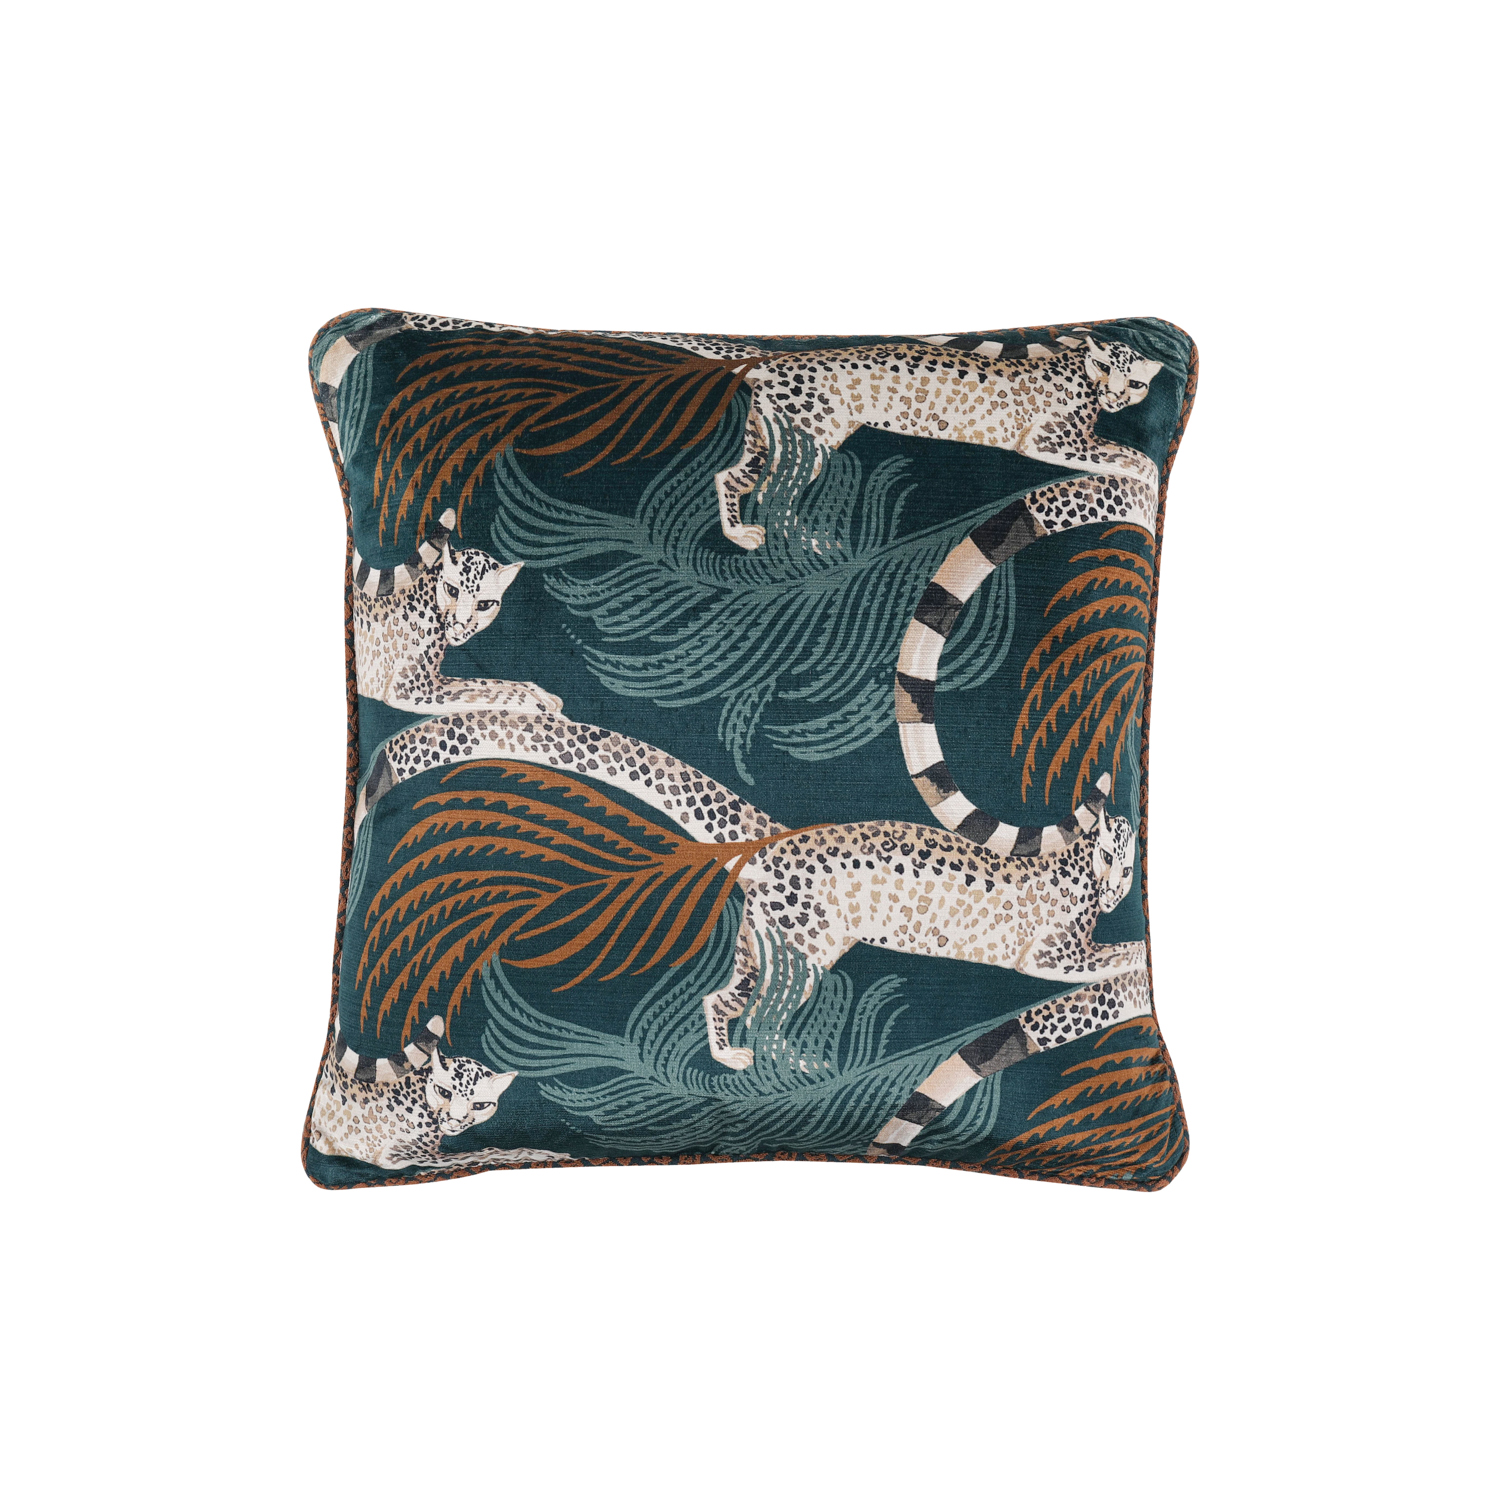 A square pillow in a print depicting lemurs and plants